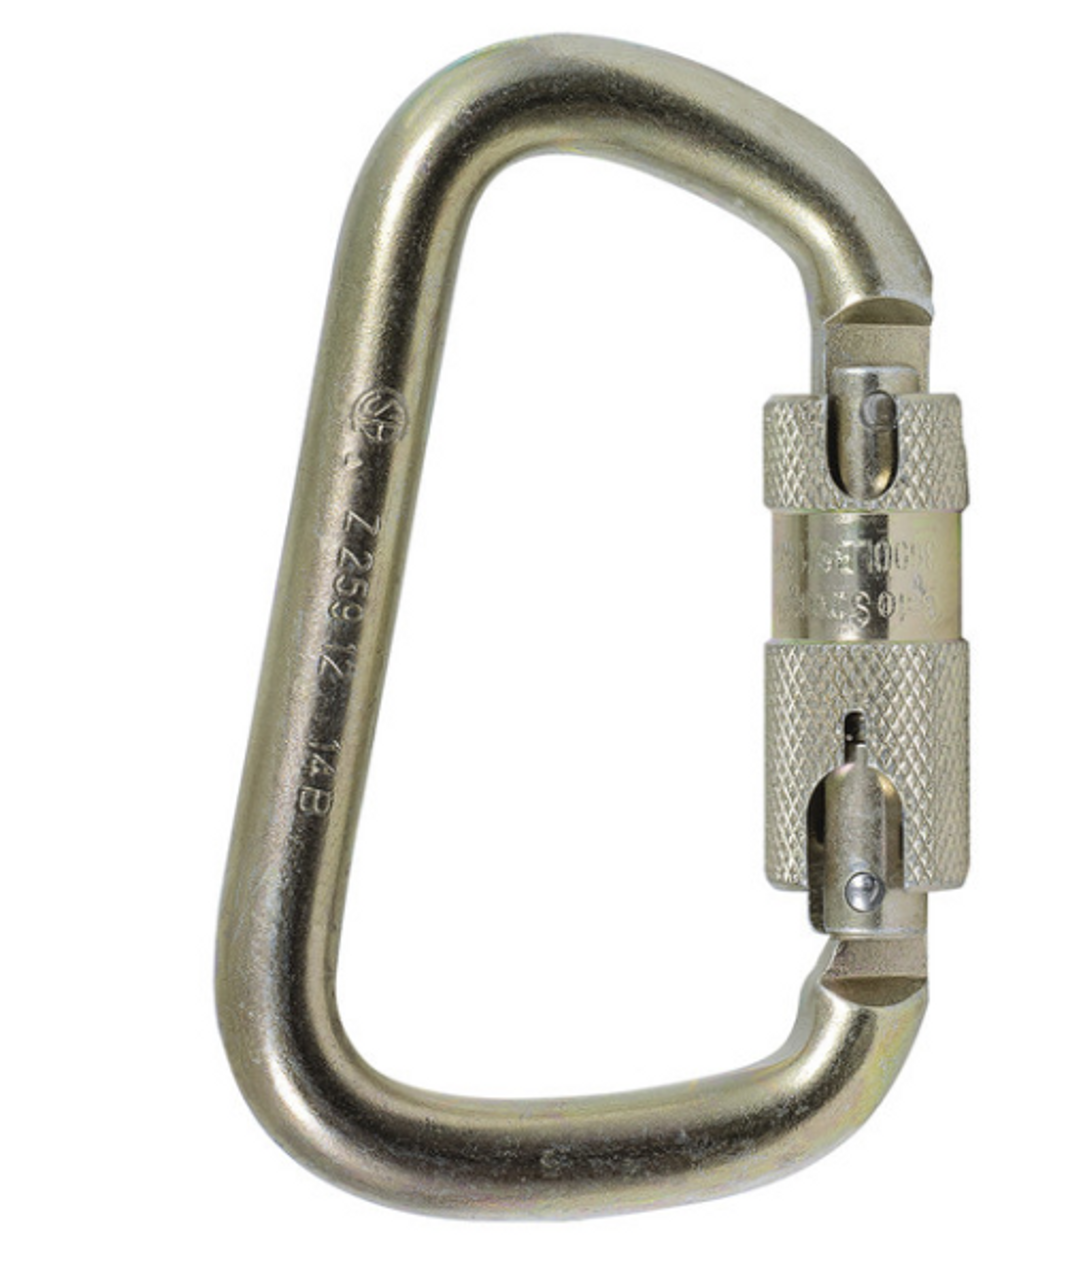 Features
Lightweight, easy to use with a convenient double locking mechanism
Made with zinc plated steel, this high-strength carabiner resists rust, corrosion and weathering; Making it highly durable for a small package.
Certified with a gate strength requirement of 3,600 lb, this double locking carabiner meets ANSI Z359.12 standards.
Specifications
Model Number:  CP-03015-1
Certification:  ANSI, CSA, CE
Locking Type:  Auto-Twist Lock
Material:  Alloy Steel (Zinc Plated)
Opening:  3/4 inch
Product Number:  V860120